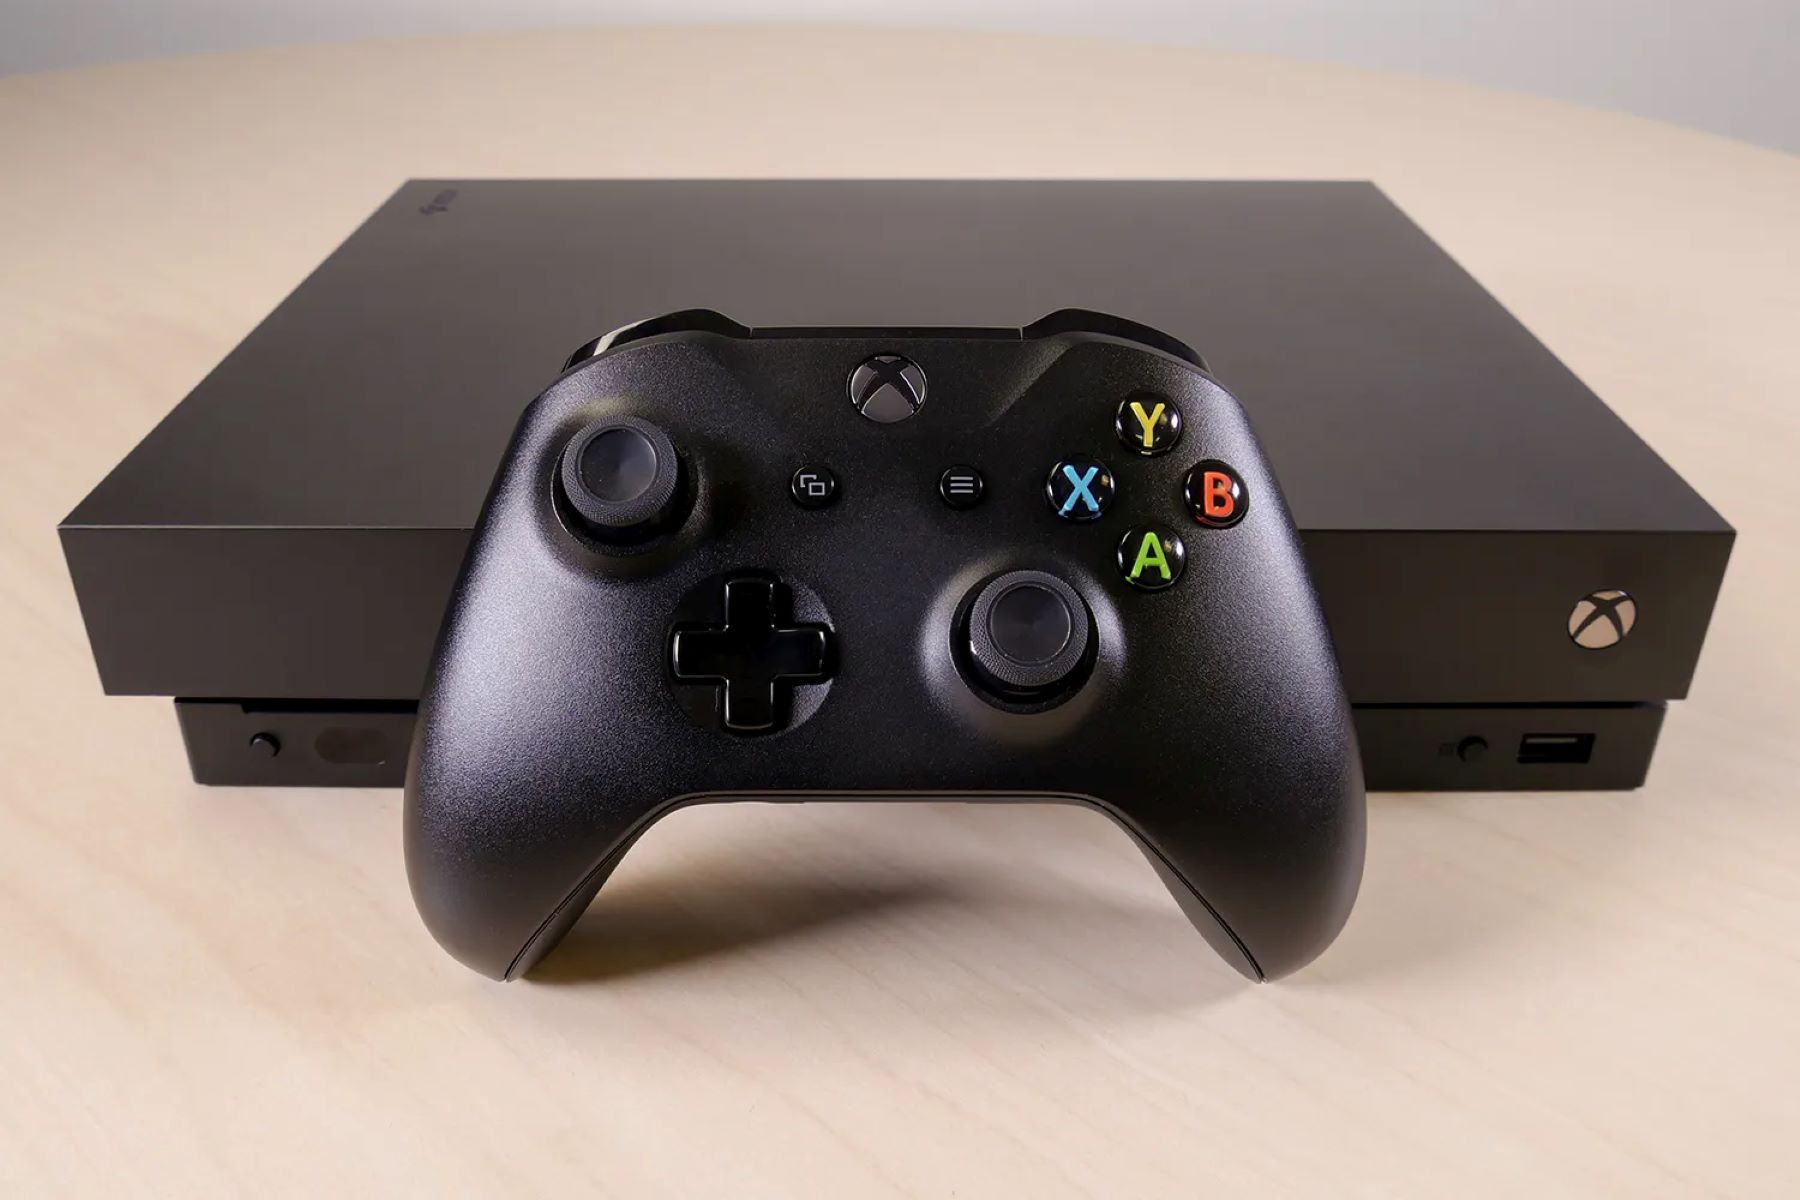 Why Microsoft's Decision To Name Their Console Xbox One Was A Missed Opportunity